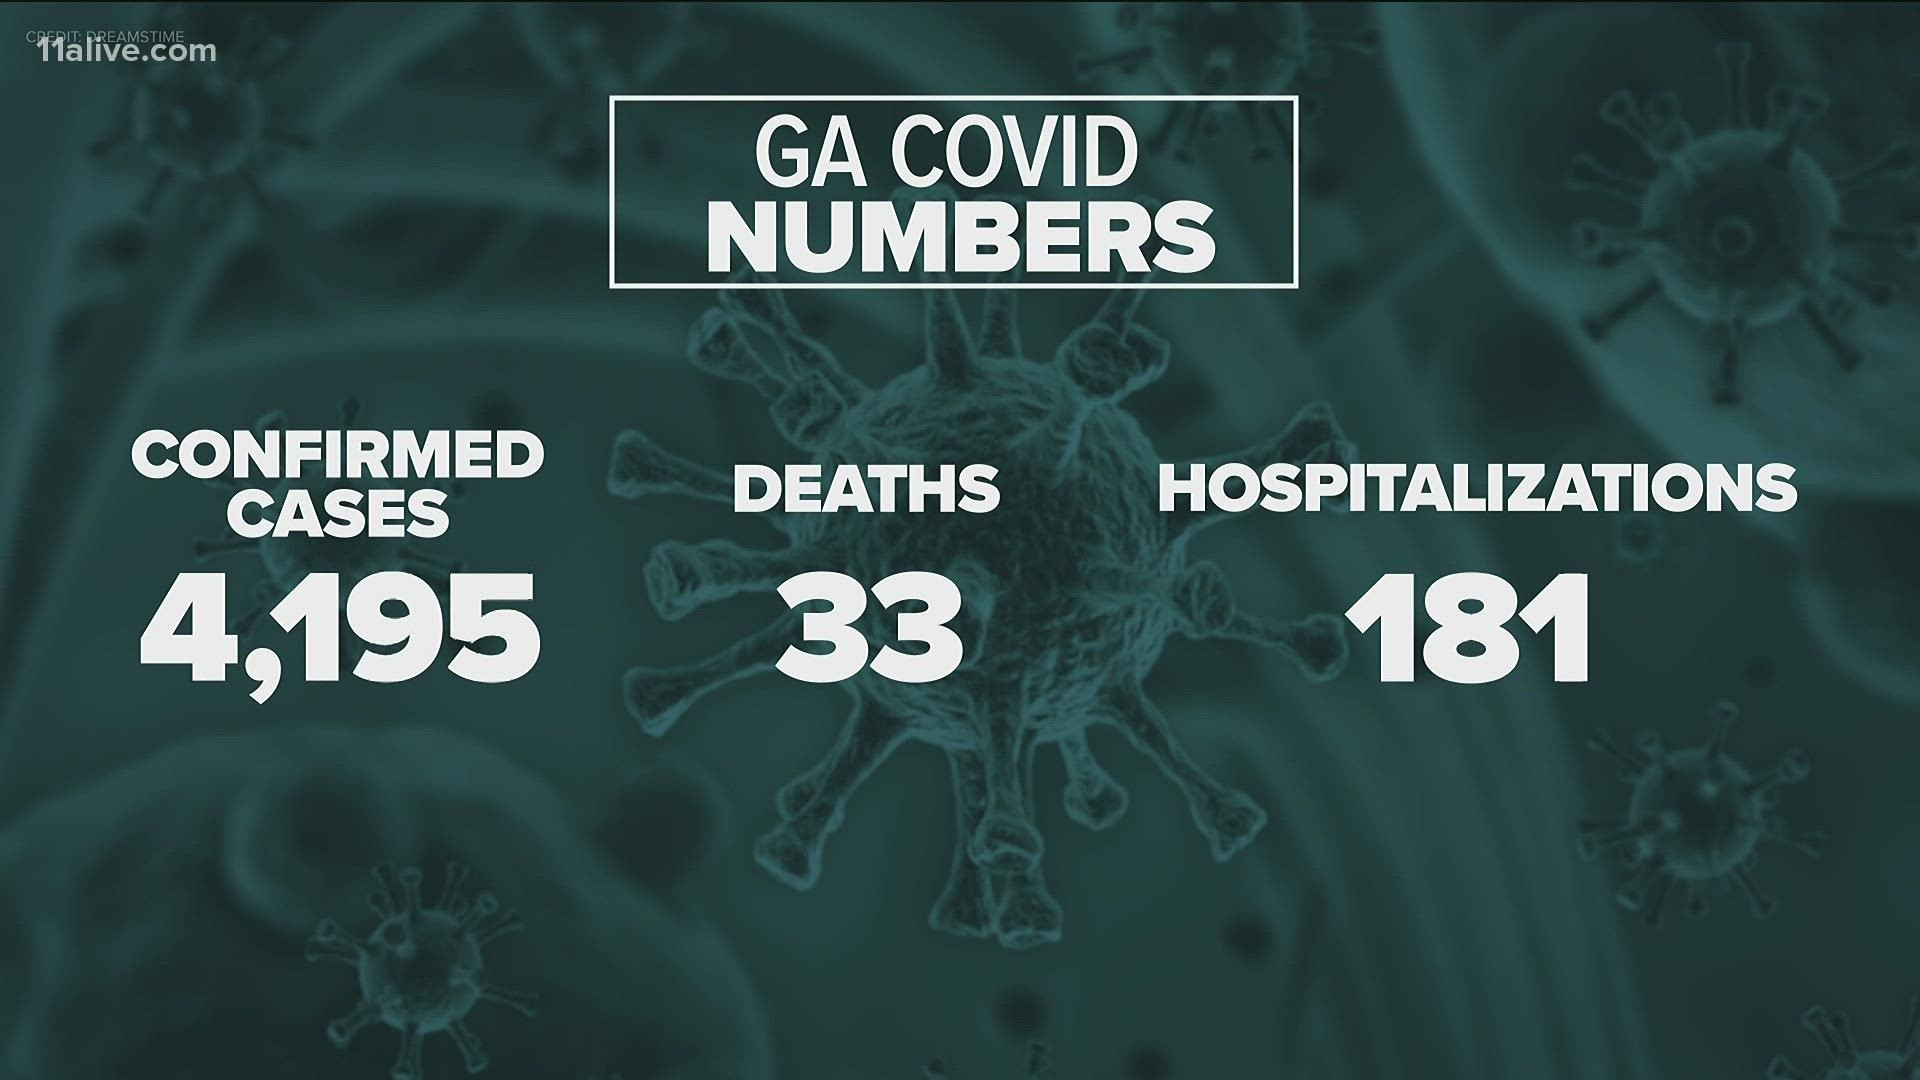 Health officials are warning the COVID pandemic is far from over.